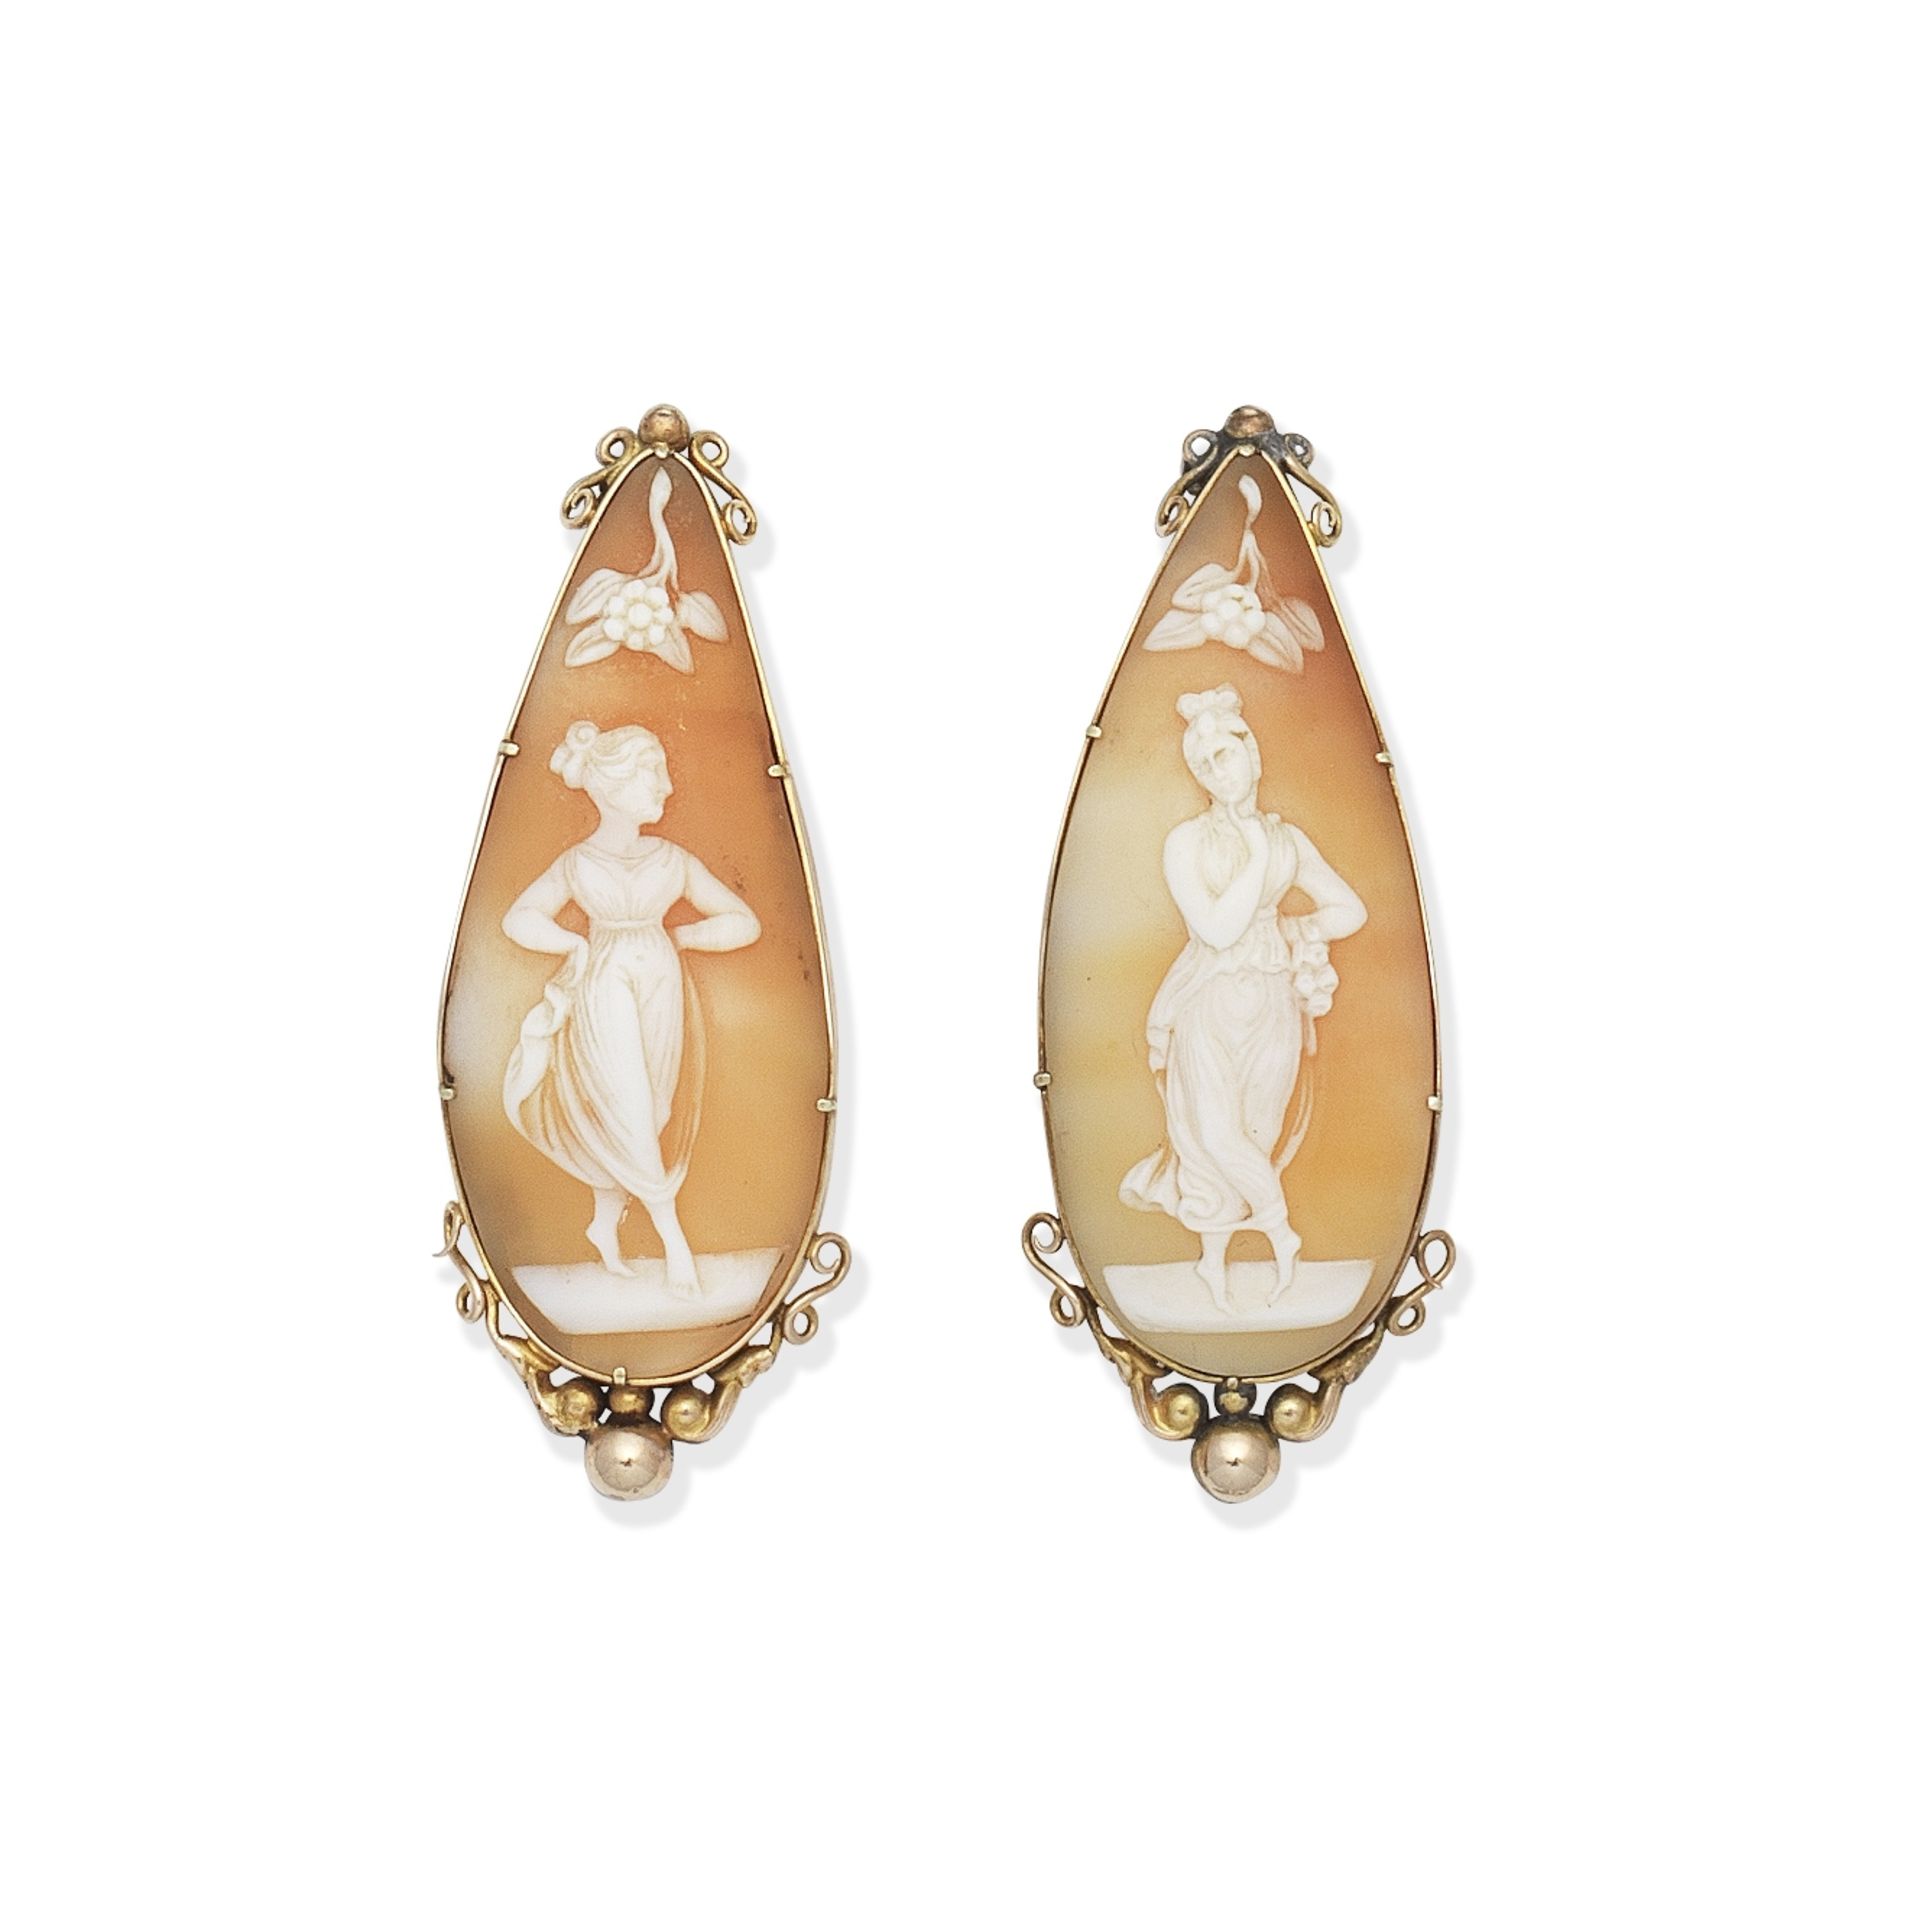 TWO SHELL CAMEO BROOCHES,